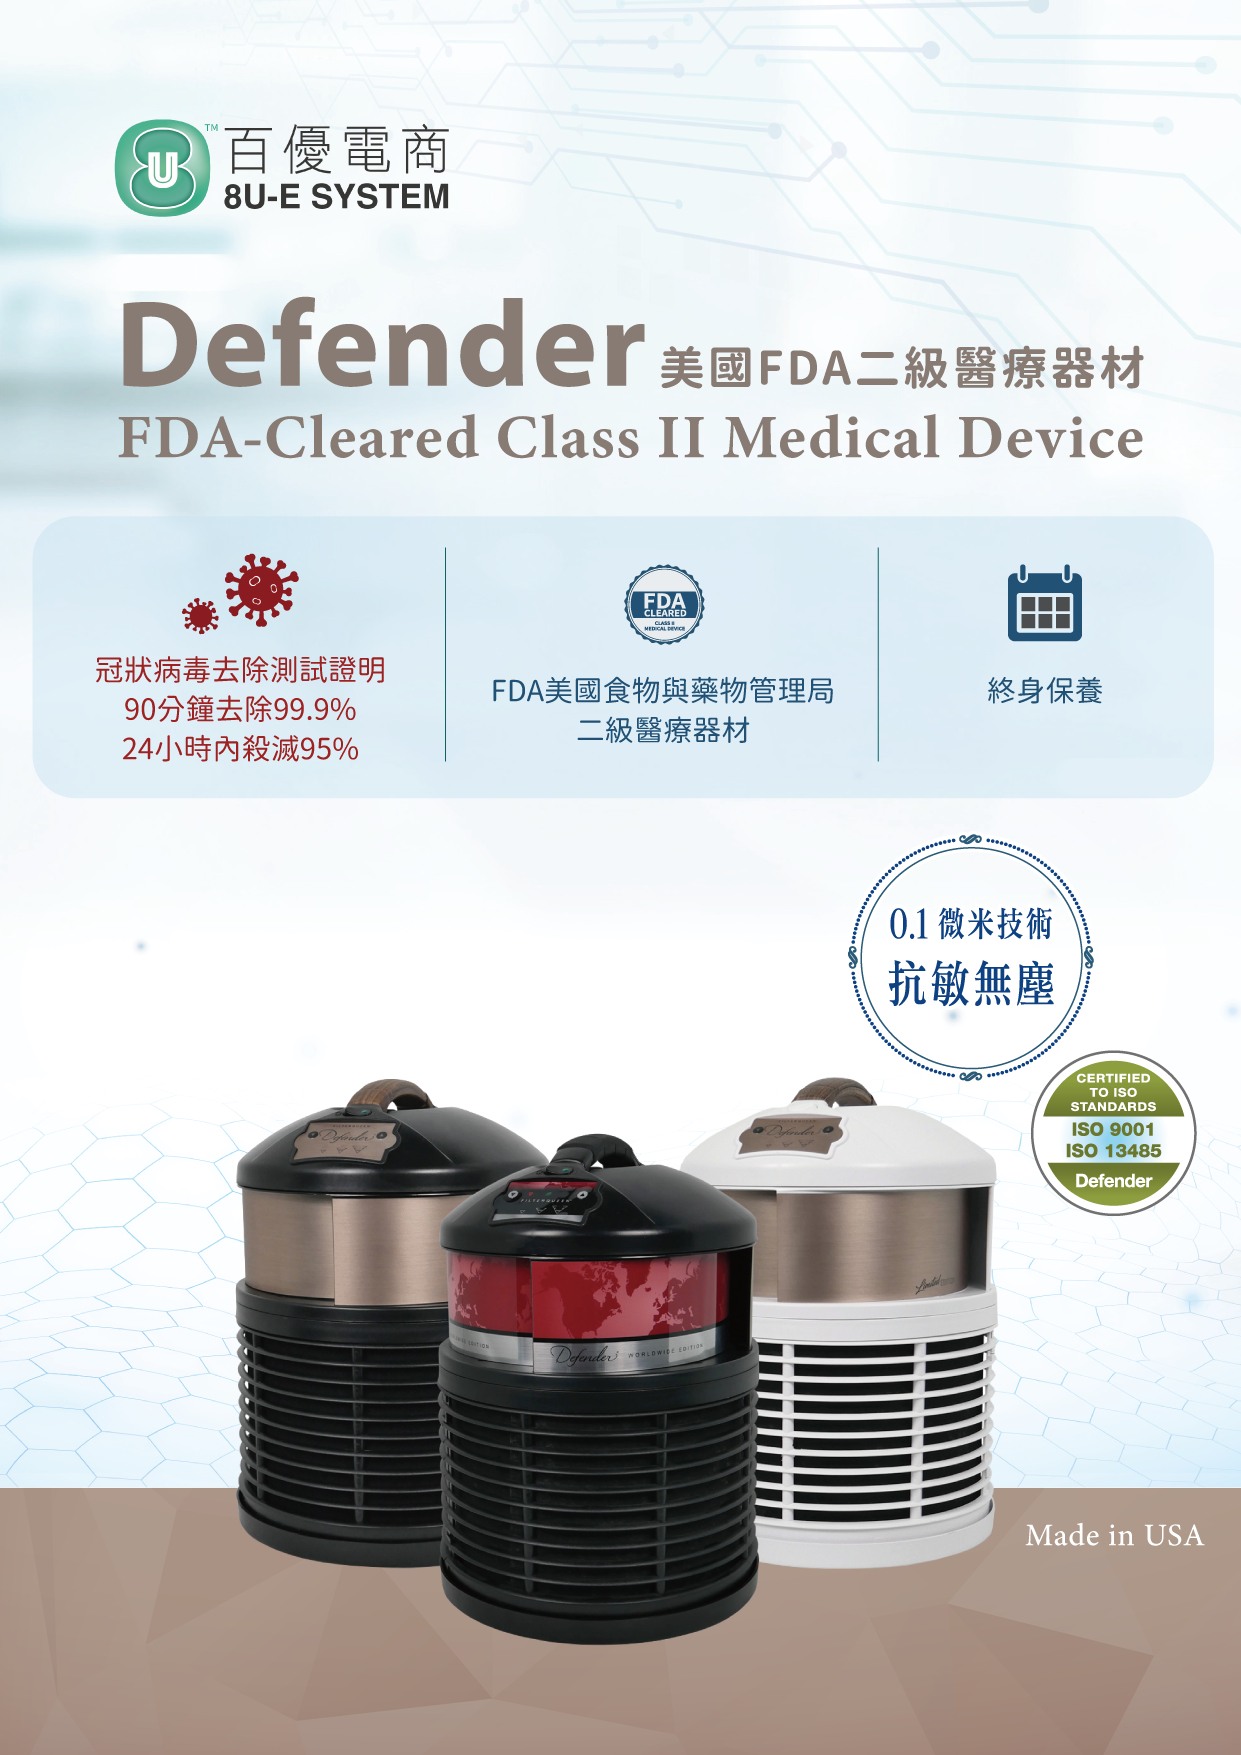 2defender-fda-cleared-class-ii-medical-device-1-5-1-.png